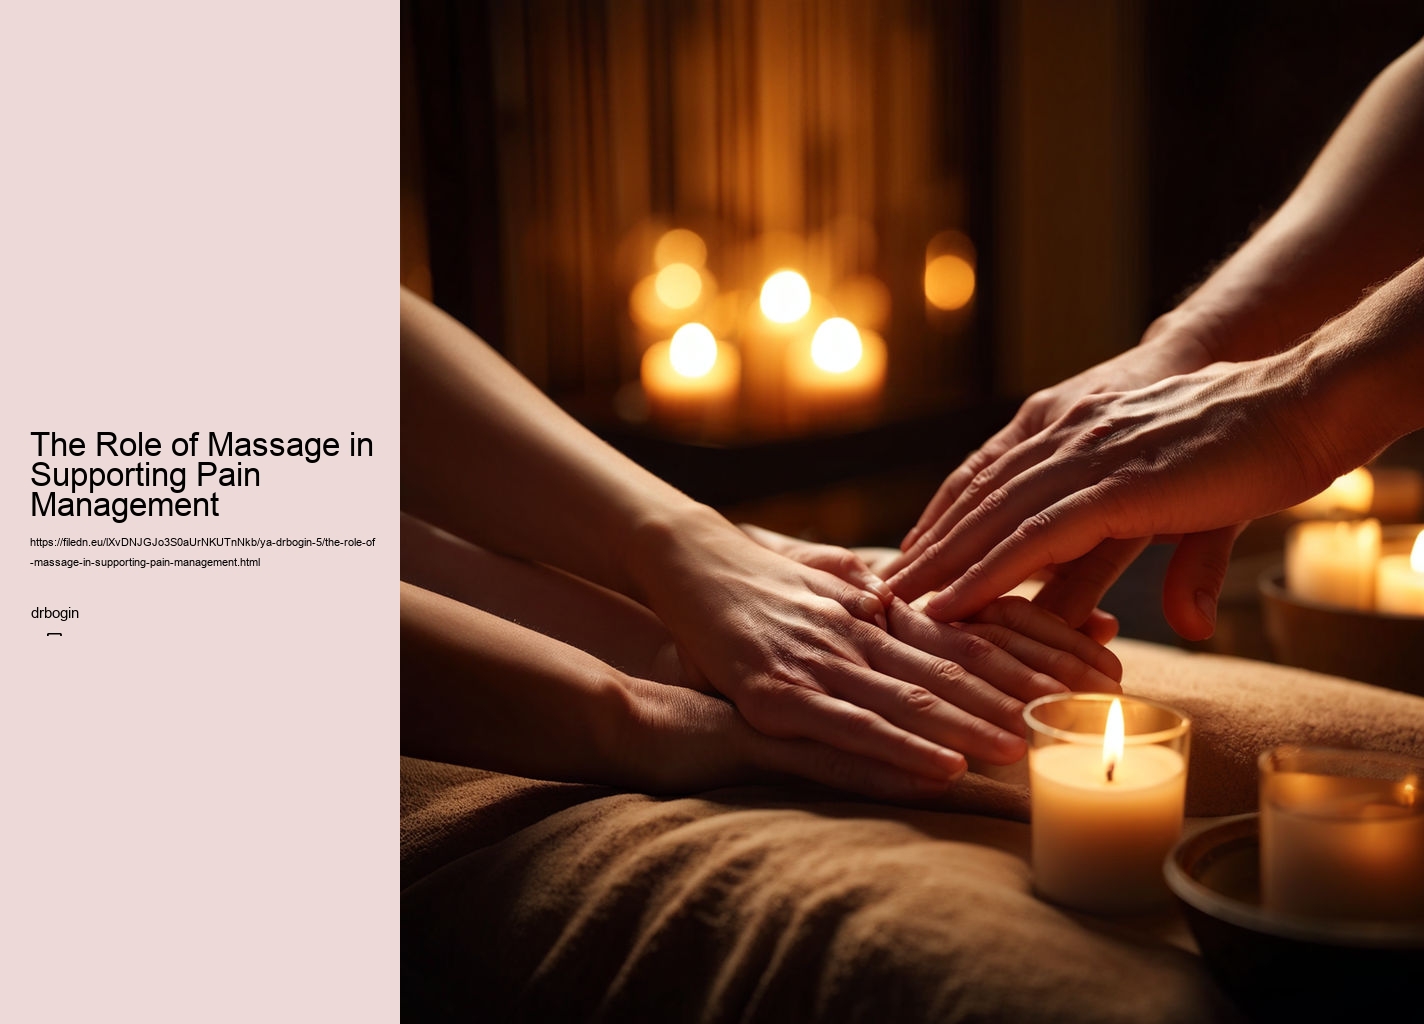 The Role of Massage in Supporting Pain Management